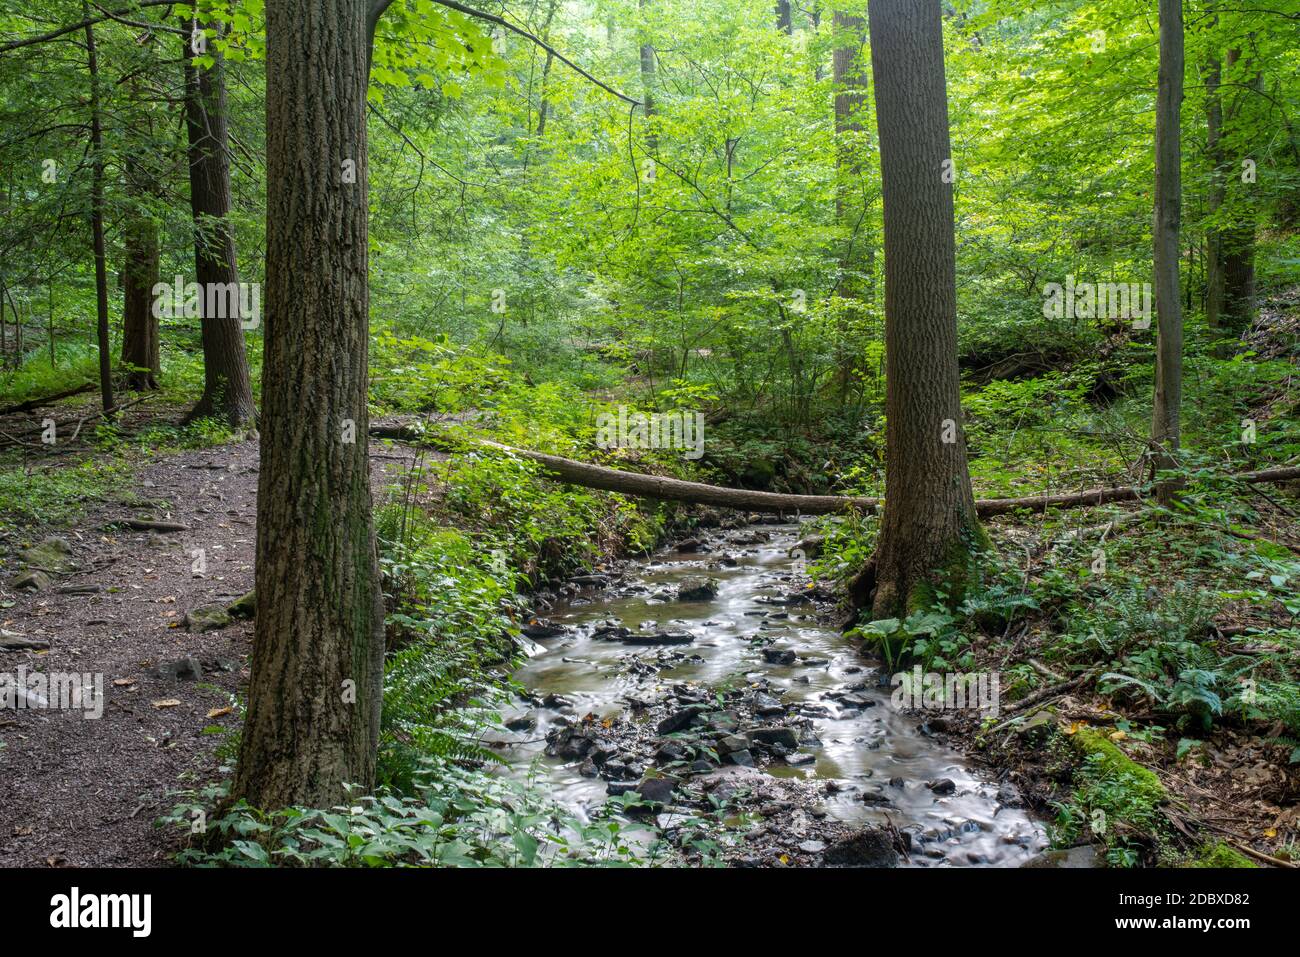 Beautiful calming nature scene. Full frame image shot in natural dappled sunlight. Long exposure gives a soft, abstract, surreal look to the flowing s Stock Photo